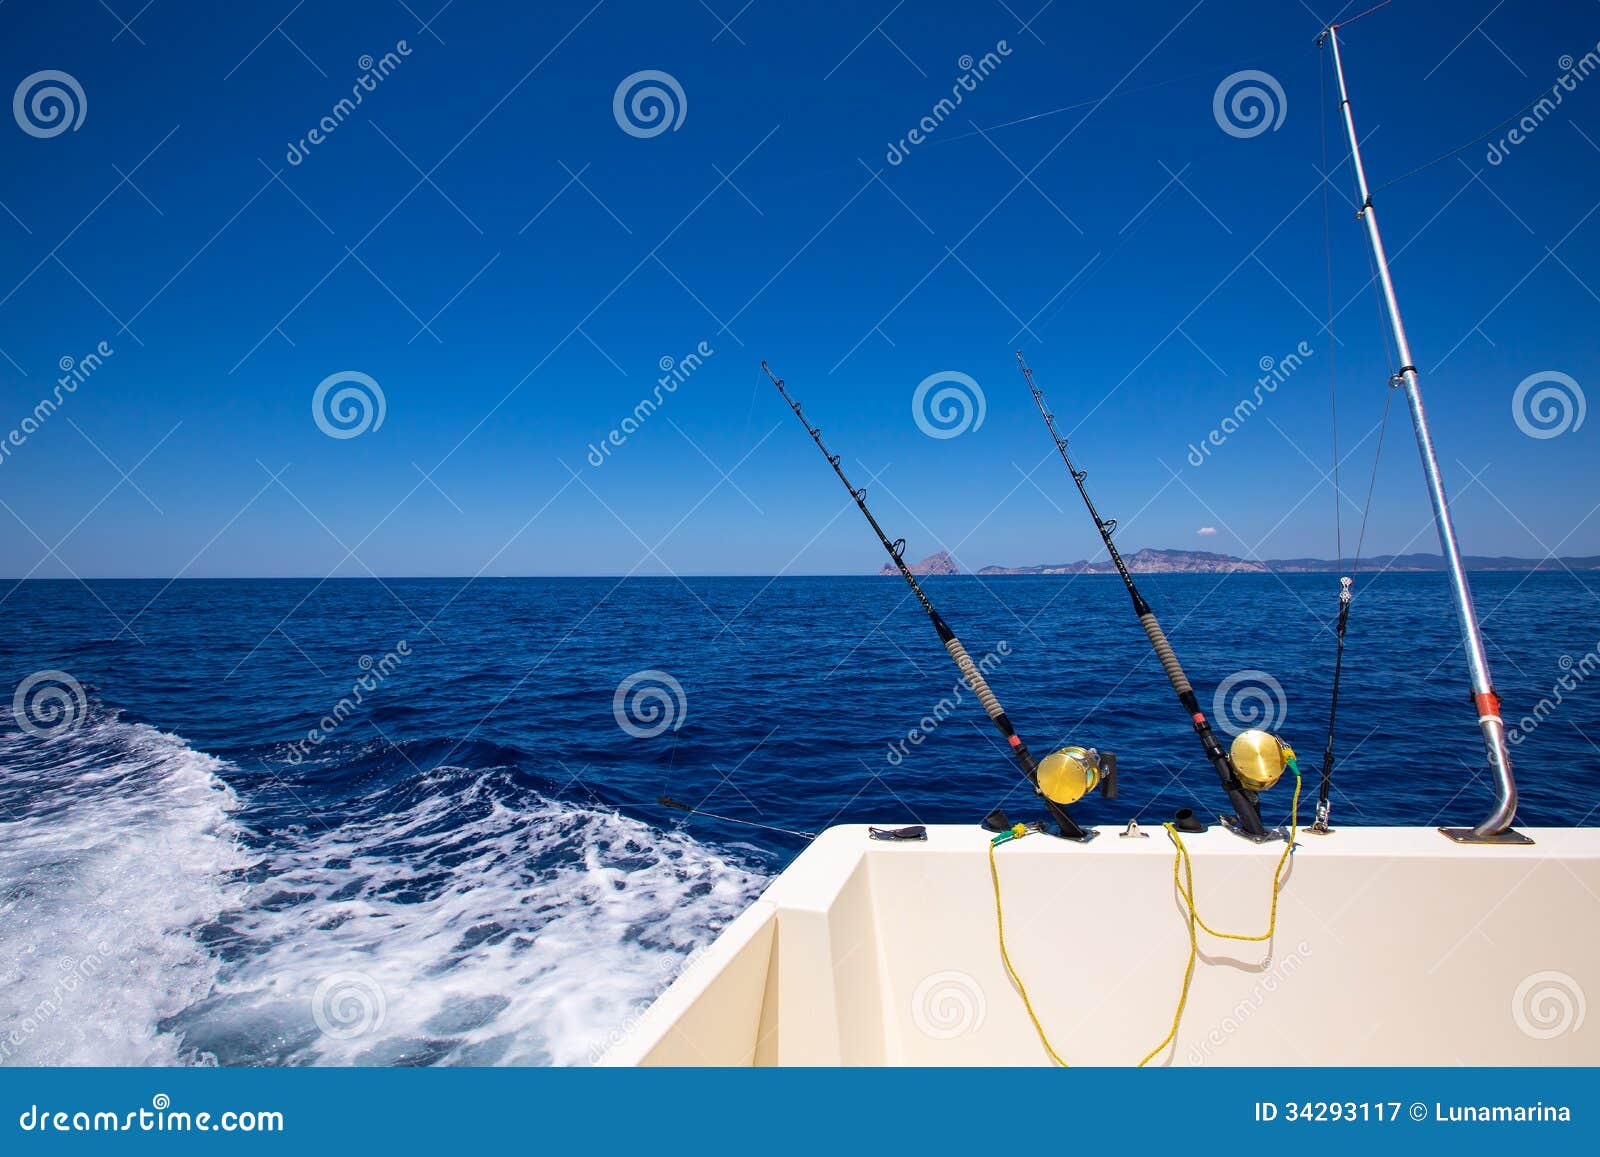 Ibiza Fishing Boat Trolling Rods and Reels in Blue Sea Stock Image - Image  of sport, seascape: 34293117